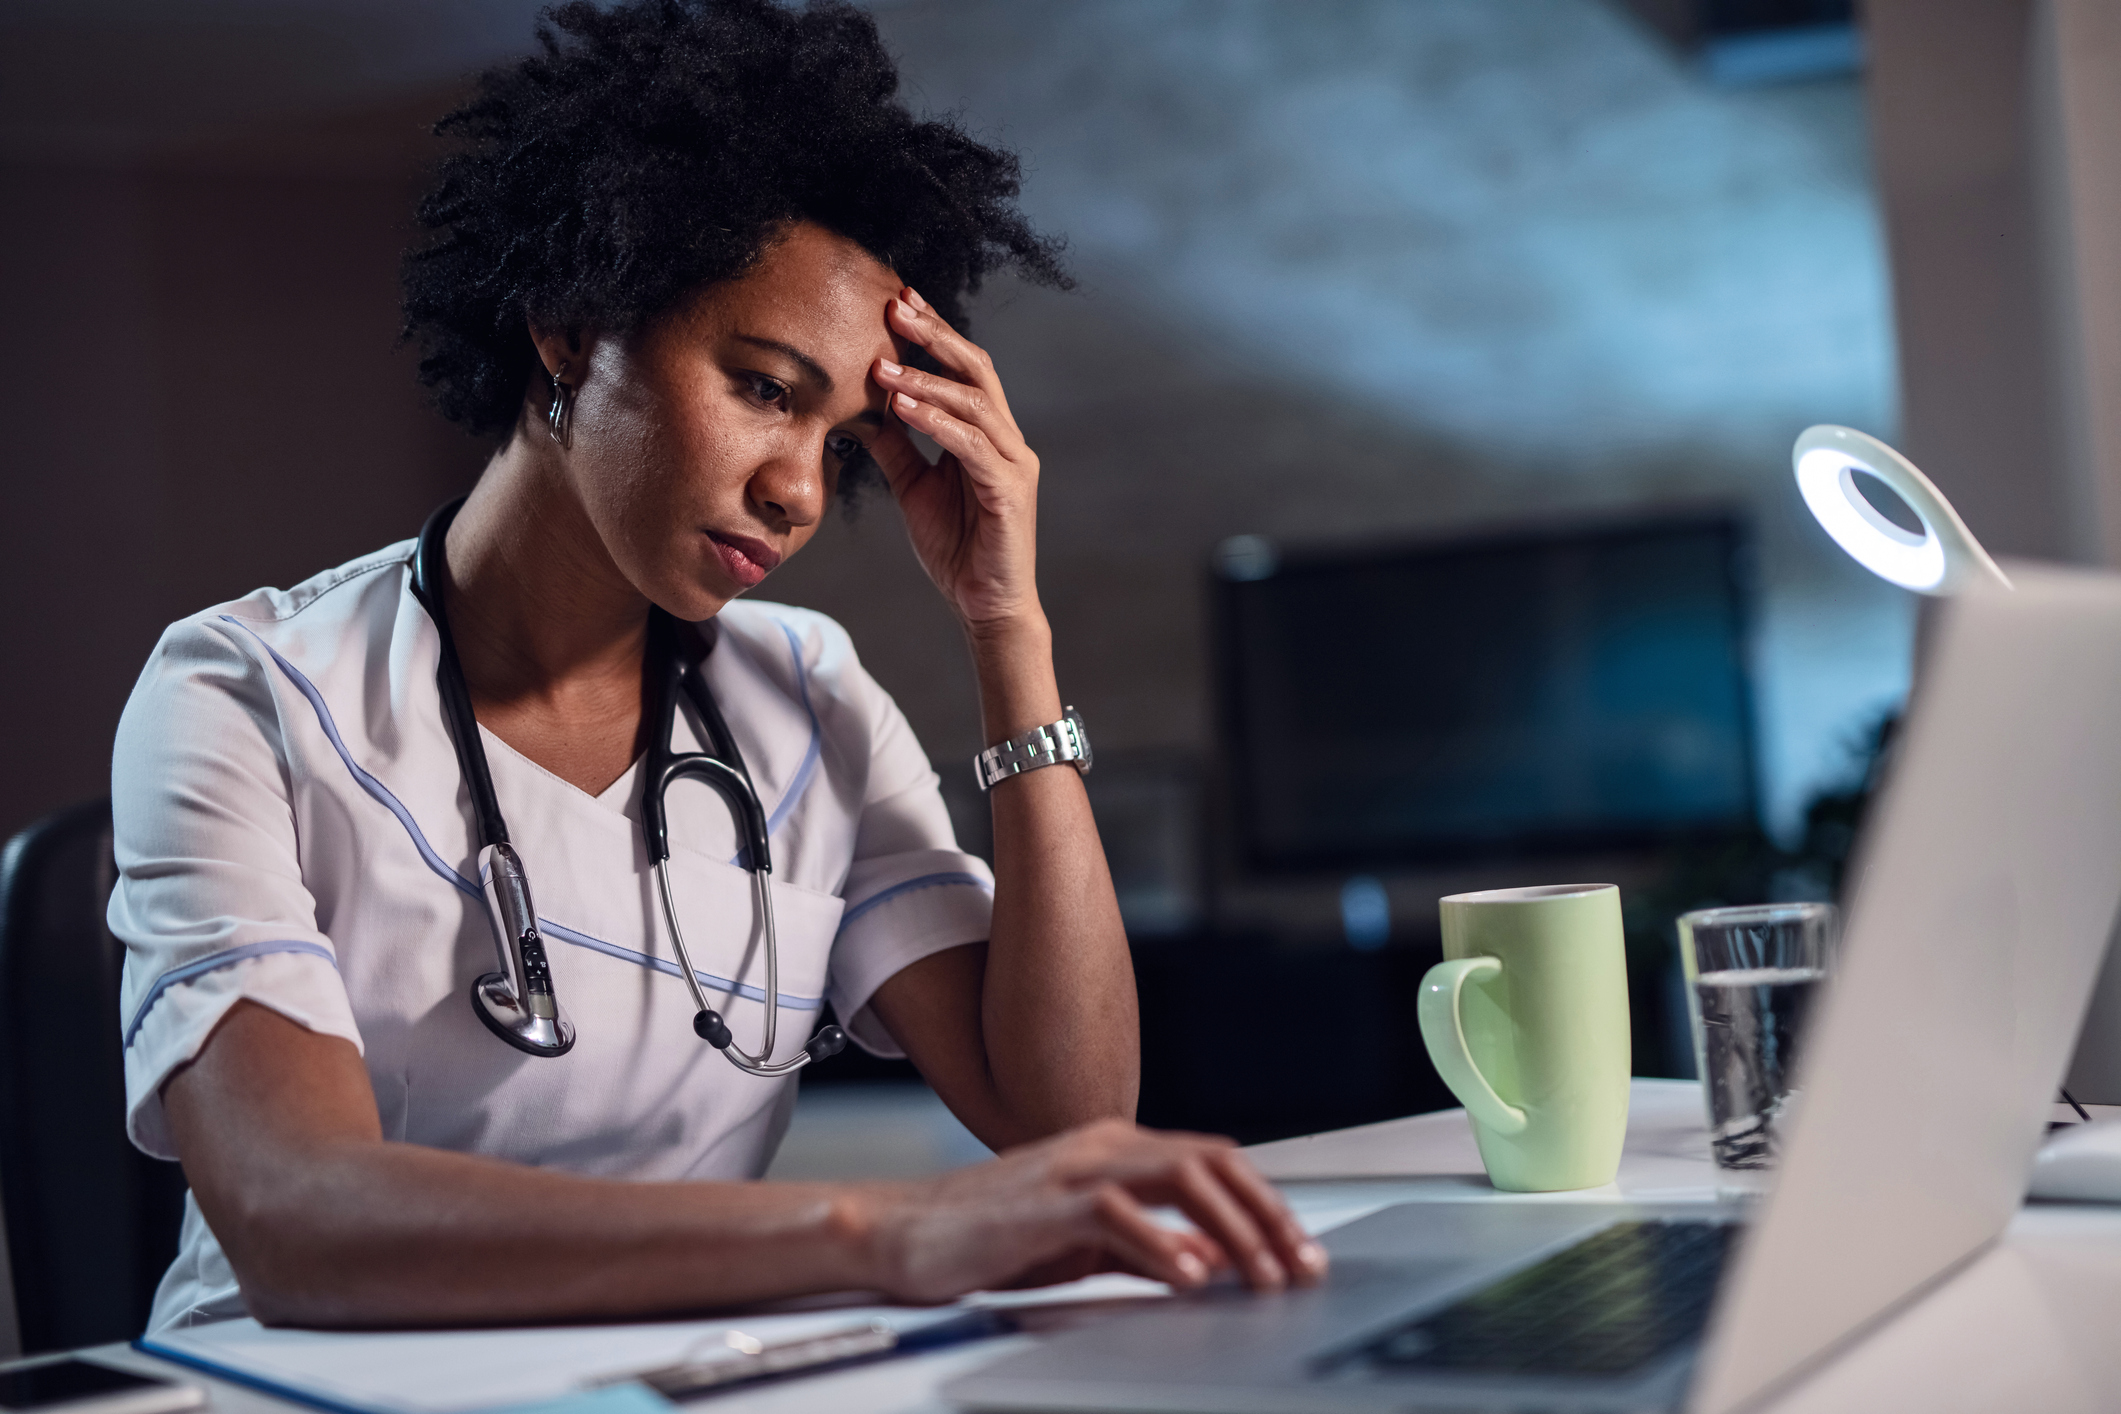 How to keep night shift from dragging your health down